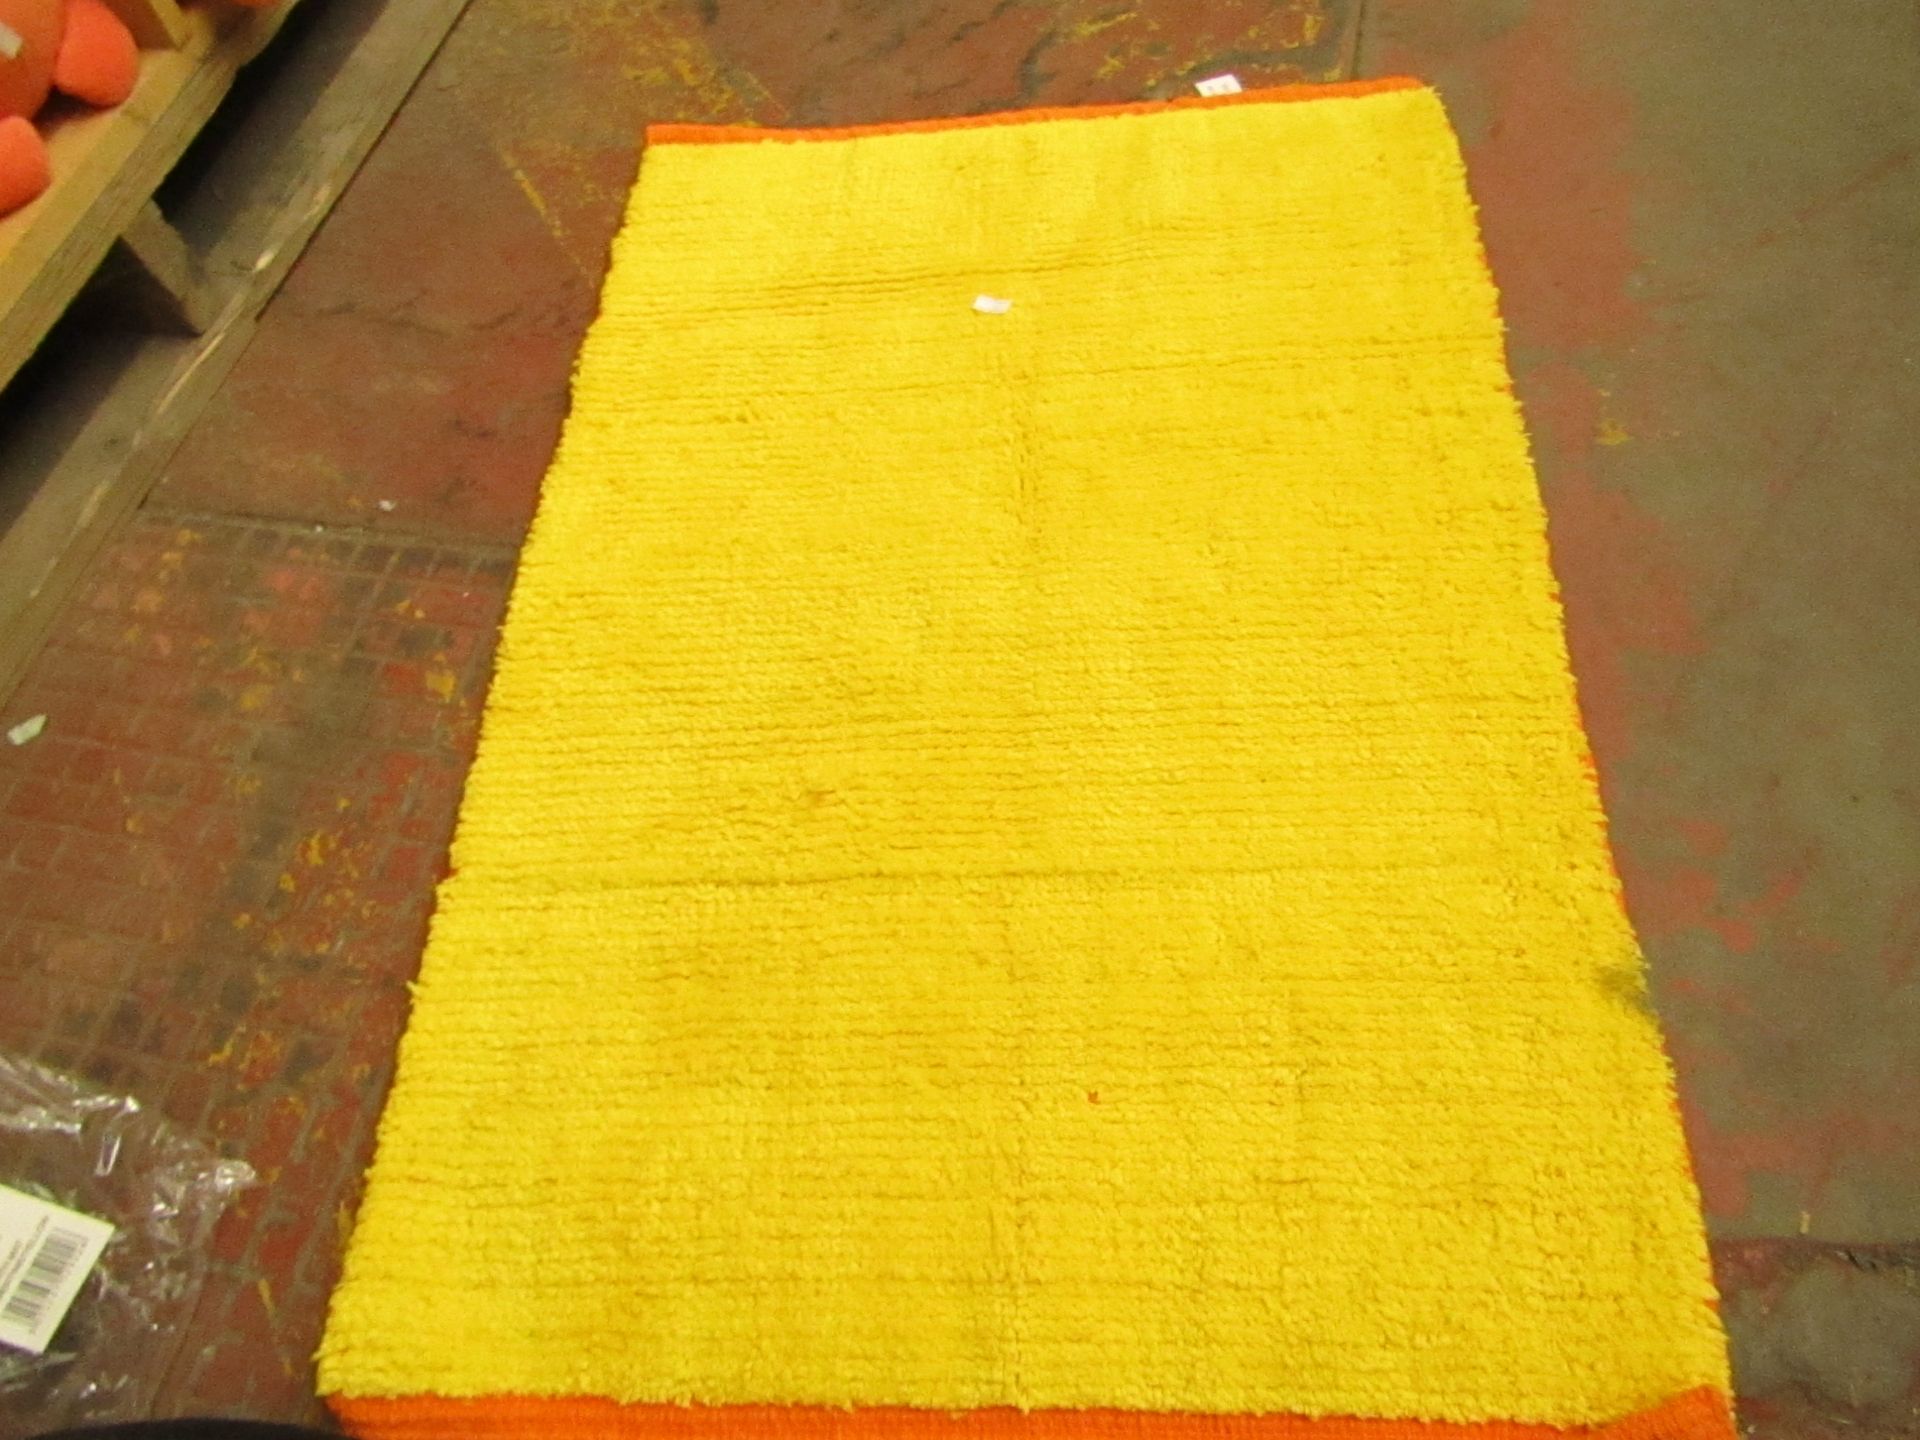 Bath Mat - Clementine & Yellow - Packaged.